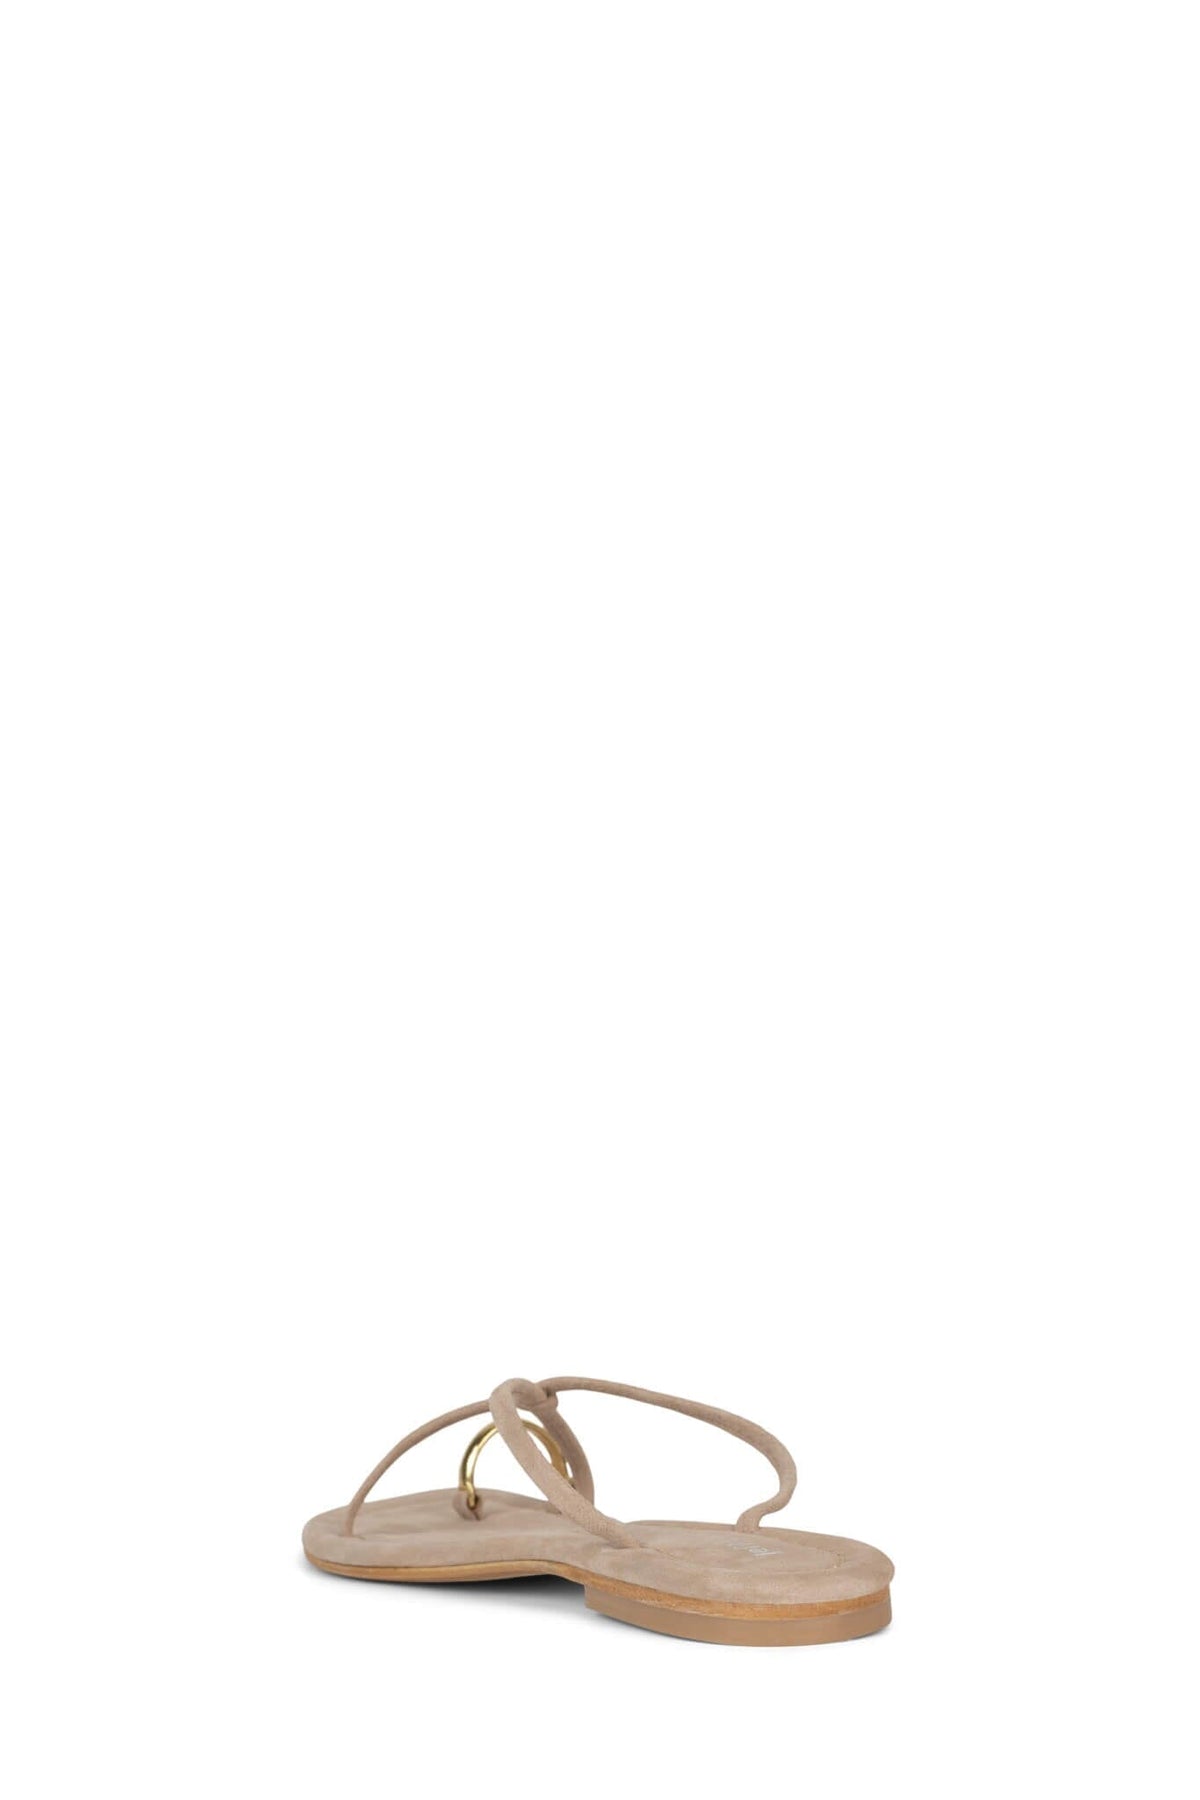 PACIFICO Jeffrey Campbell Flat Sandals Taupe Suede Gold